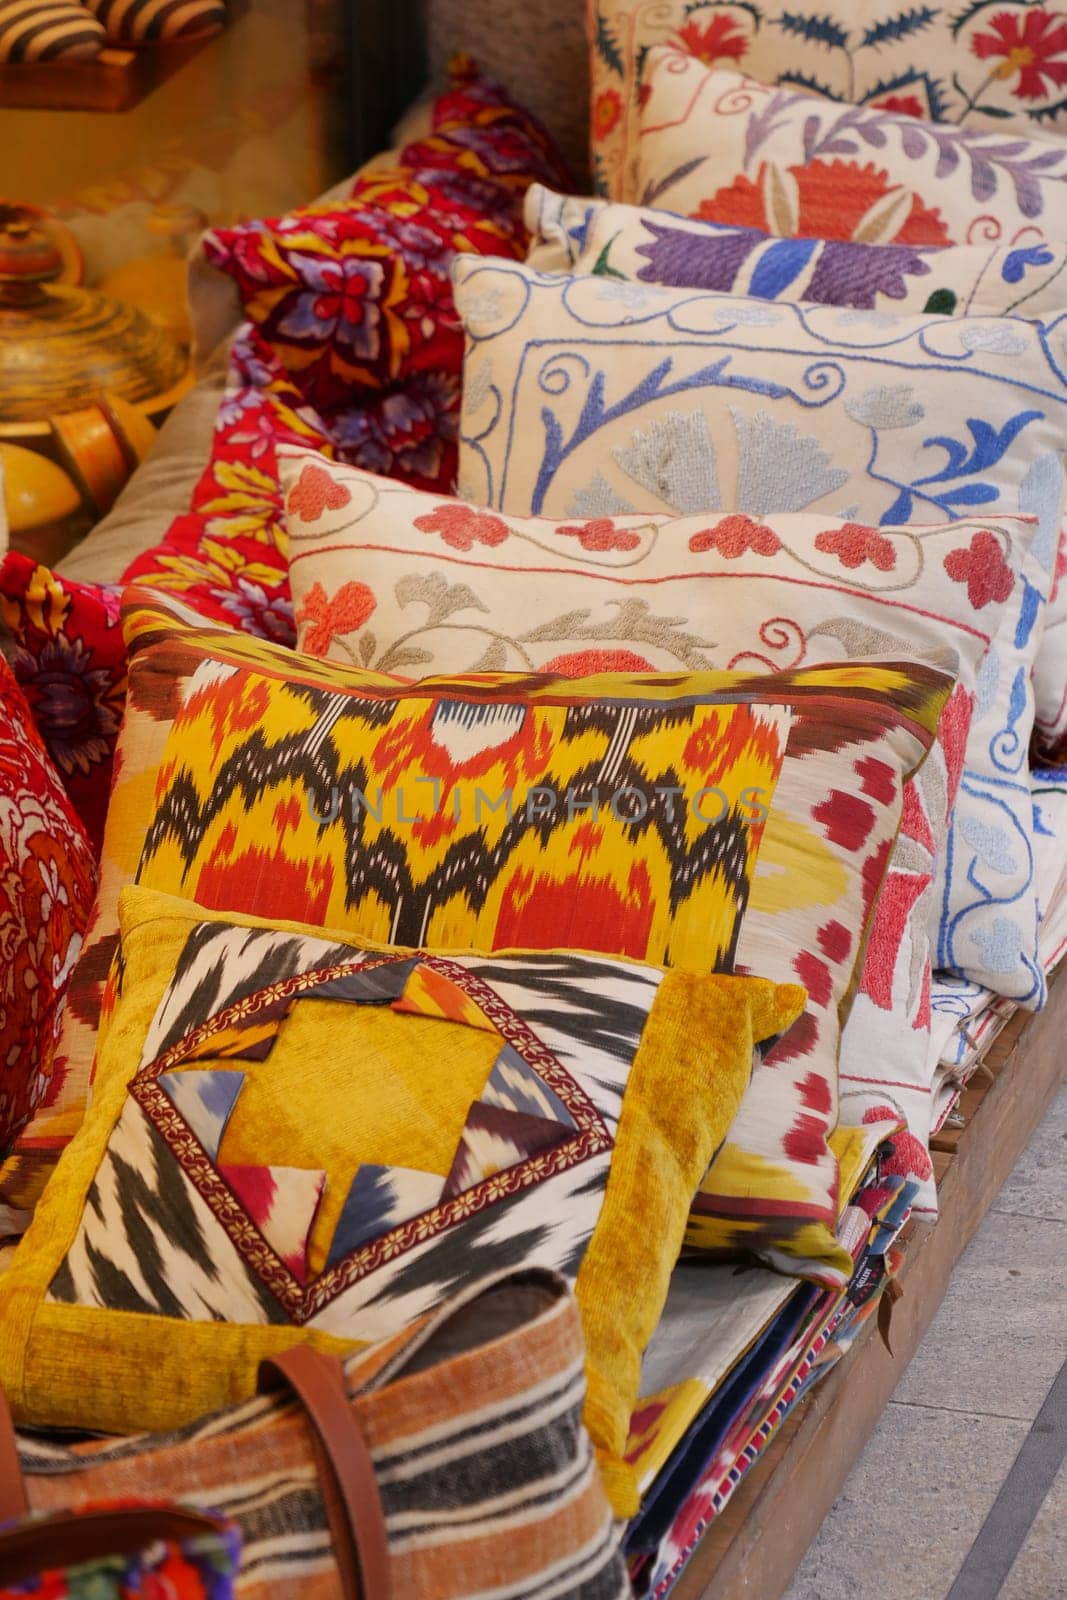 Colourful cushions on display for sale in a traditional Turkish Bazaar. by towfiq007